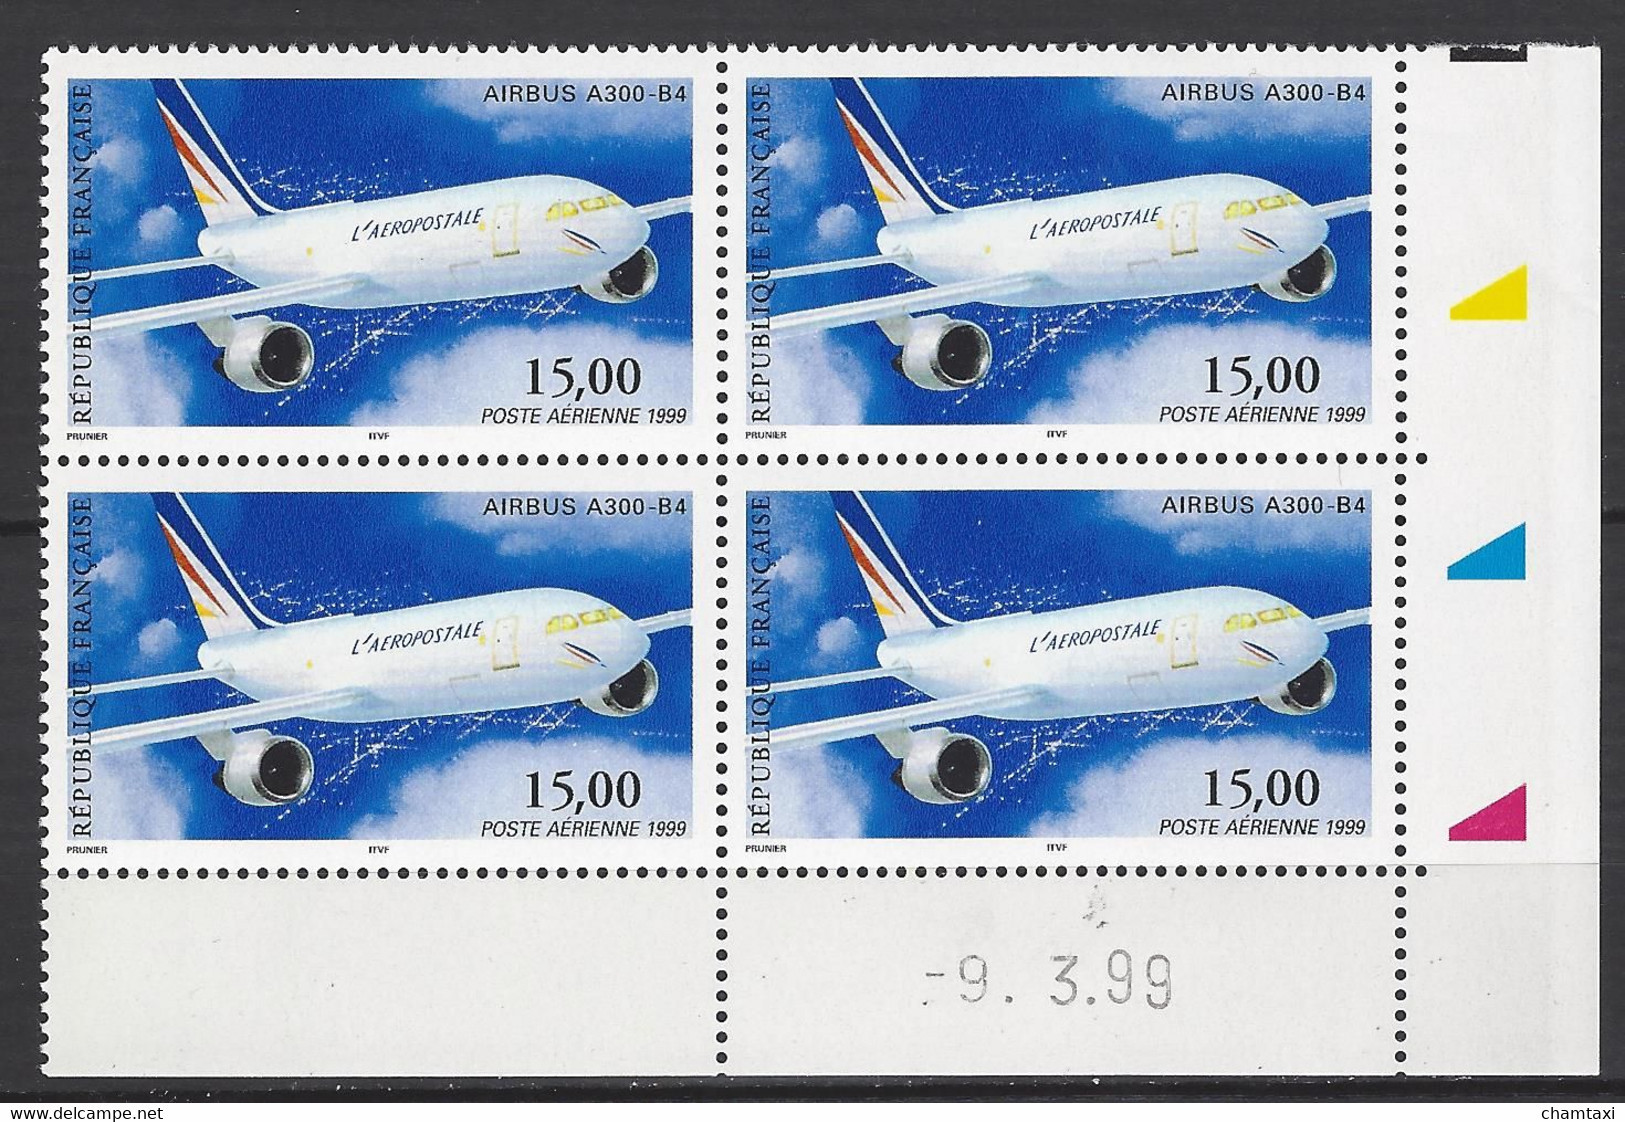 CD PA 63 FRANCE 1999 TIMBRE POSTE AERIENNE 63 AIRBUS A 300 B4  COIN DATE 63 : 9 / 3 / 99 - Airmail